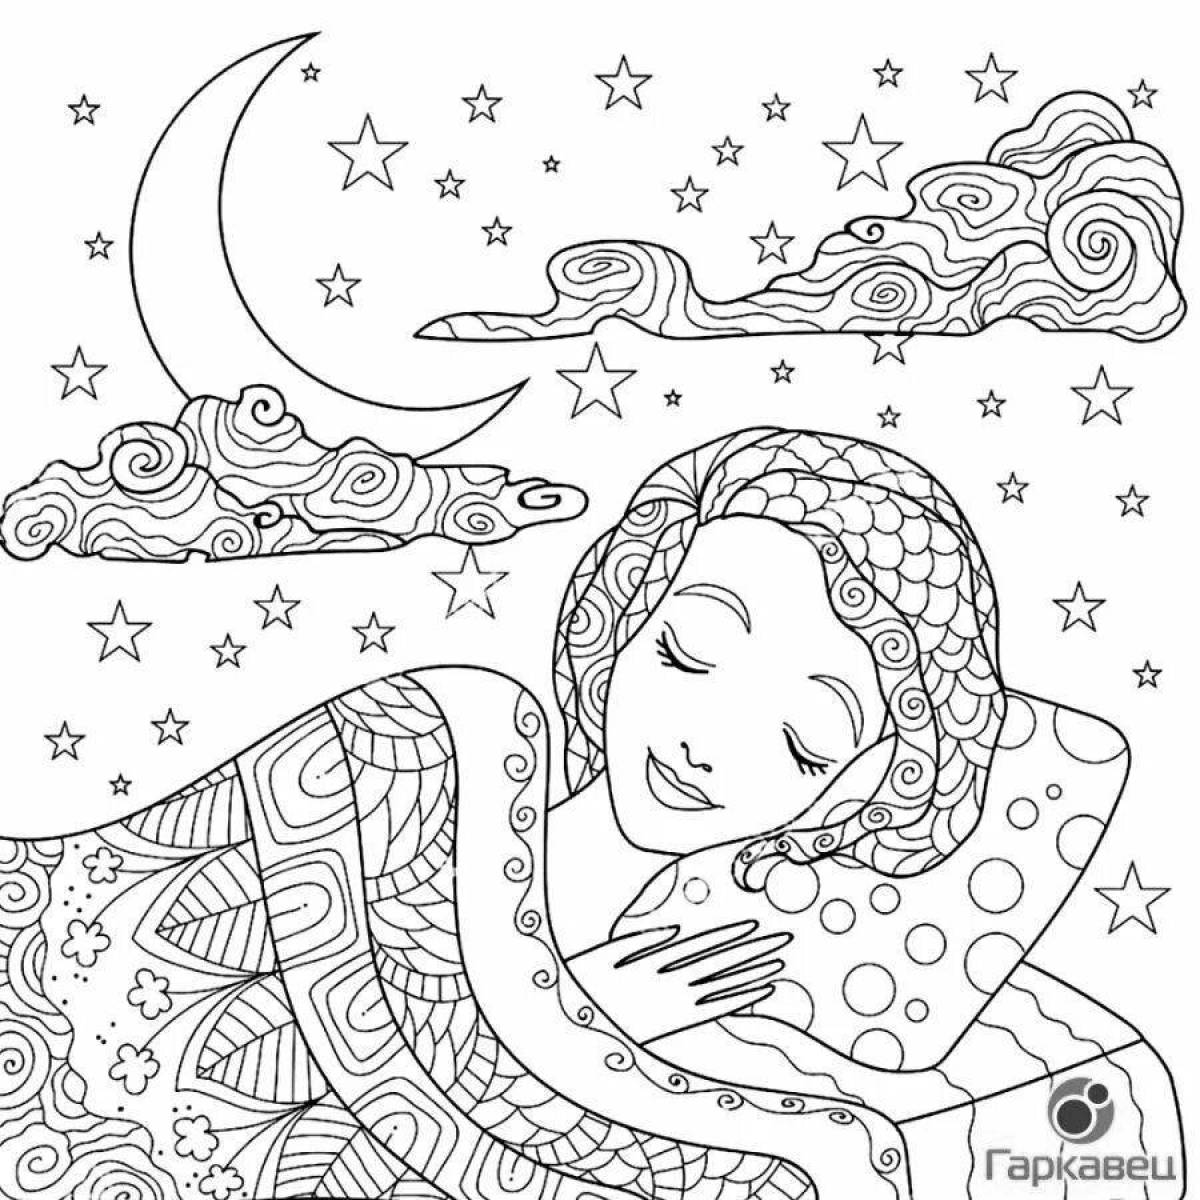 Serene winter anti-stress coloring book for kids